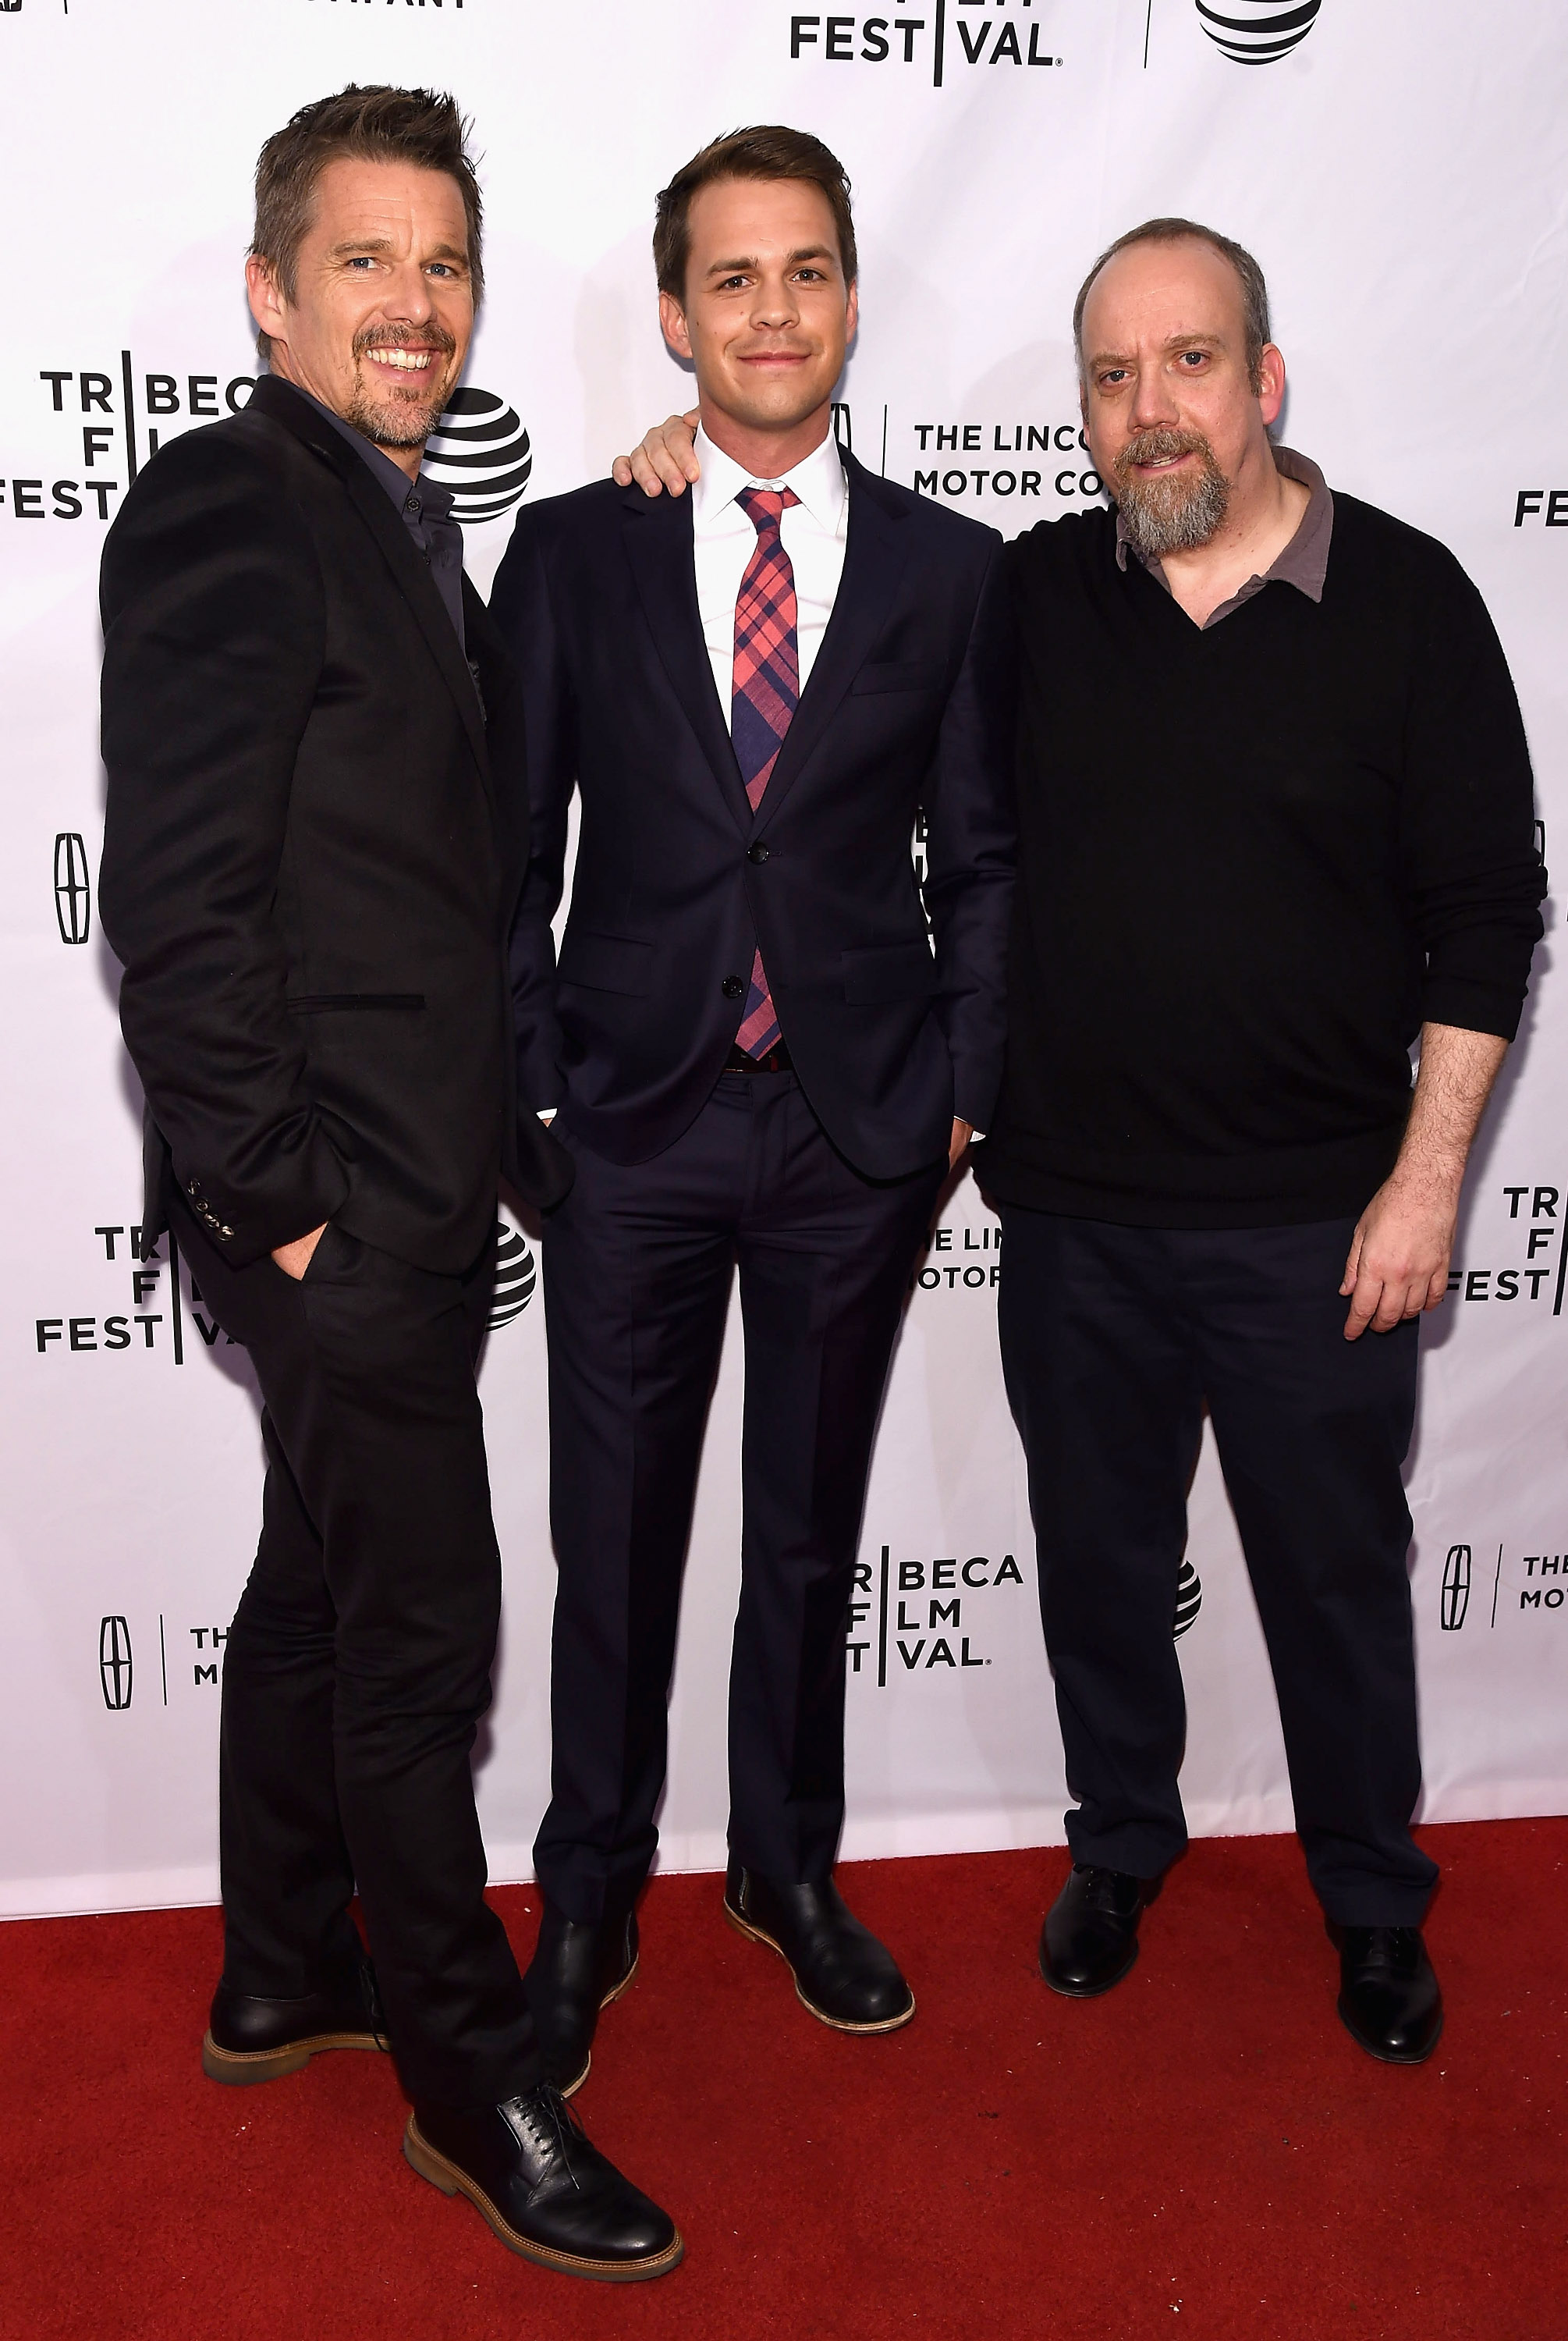 Ethan Hawke, Johnny Simmons and Paul Giamatti during the 2016 Tribeca Film Festival on April 17, 2016 in New York City.